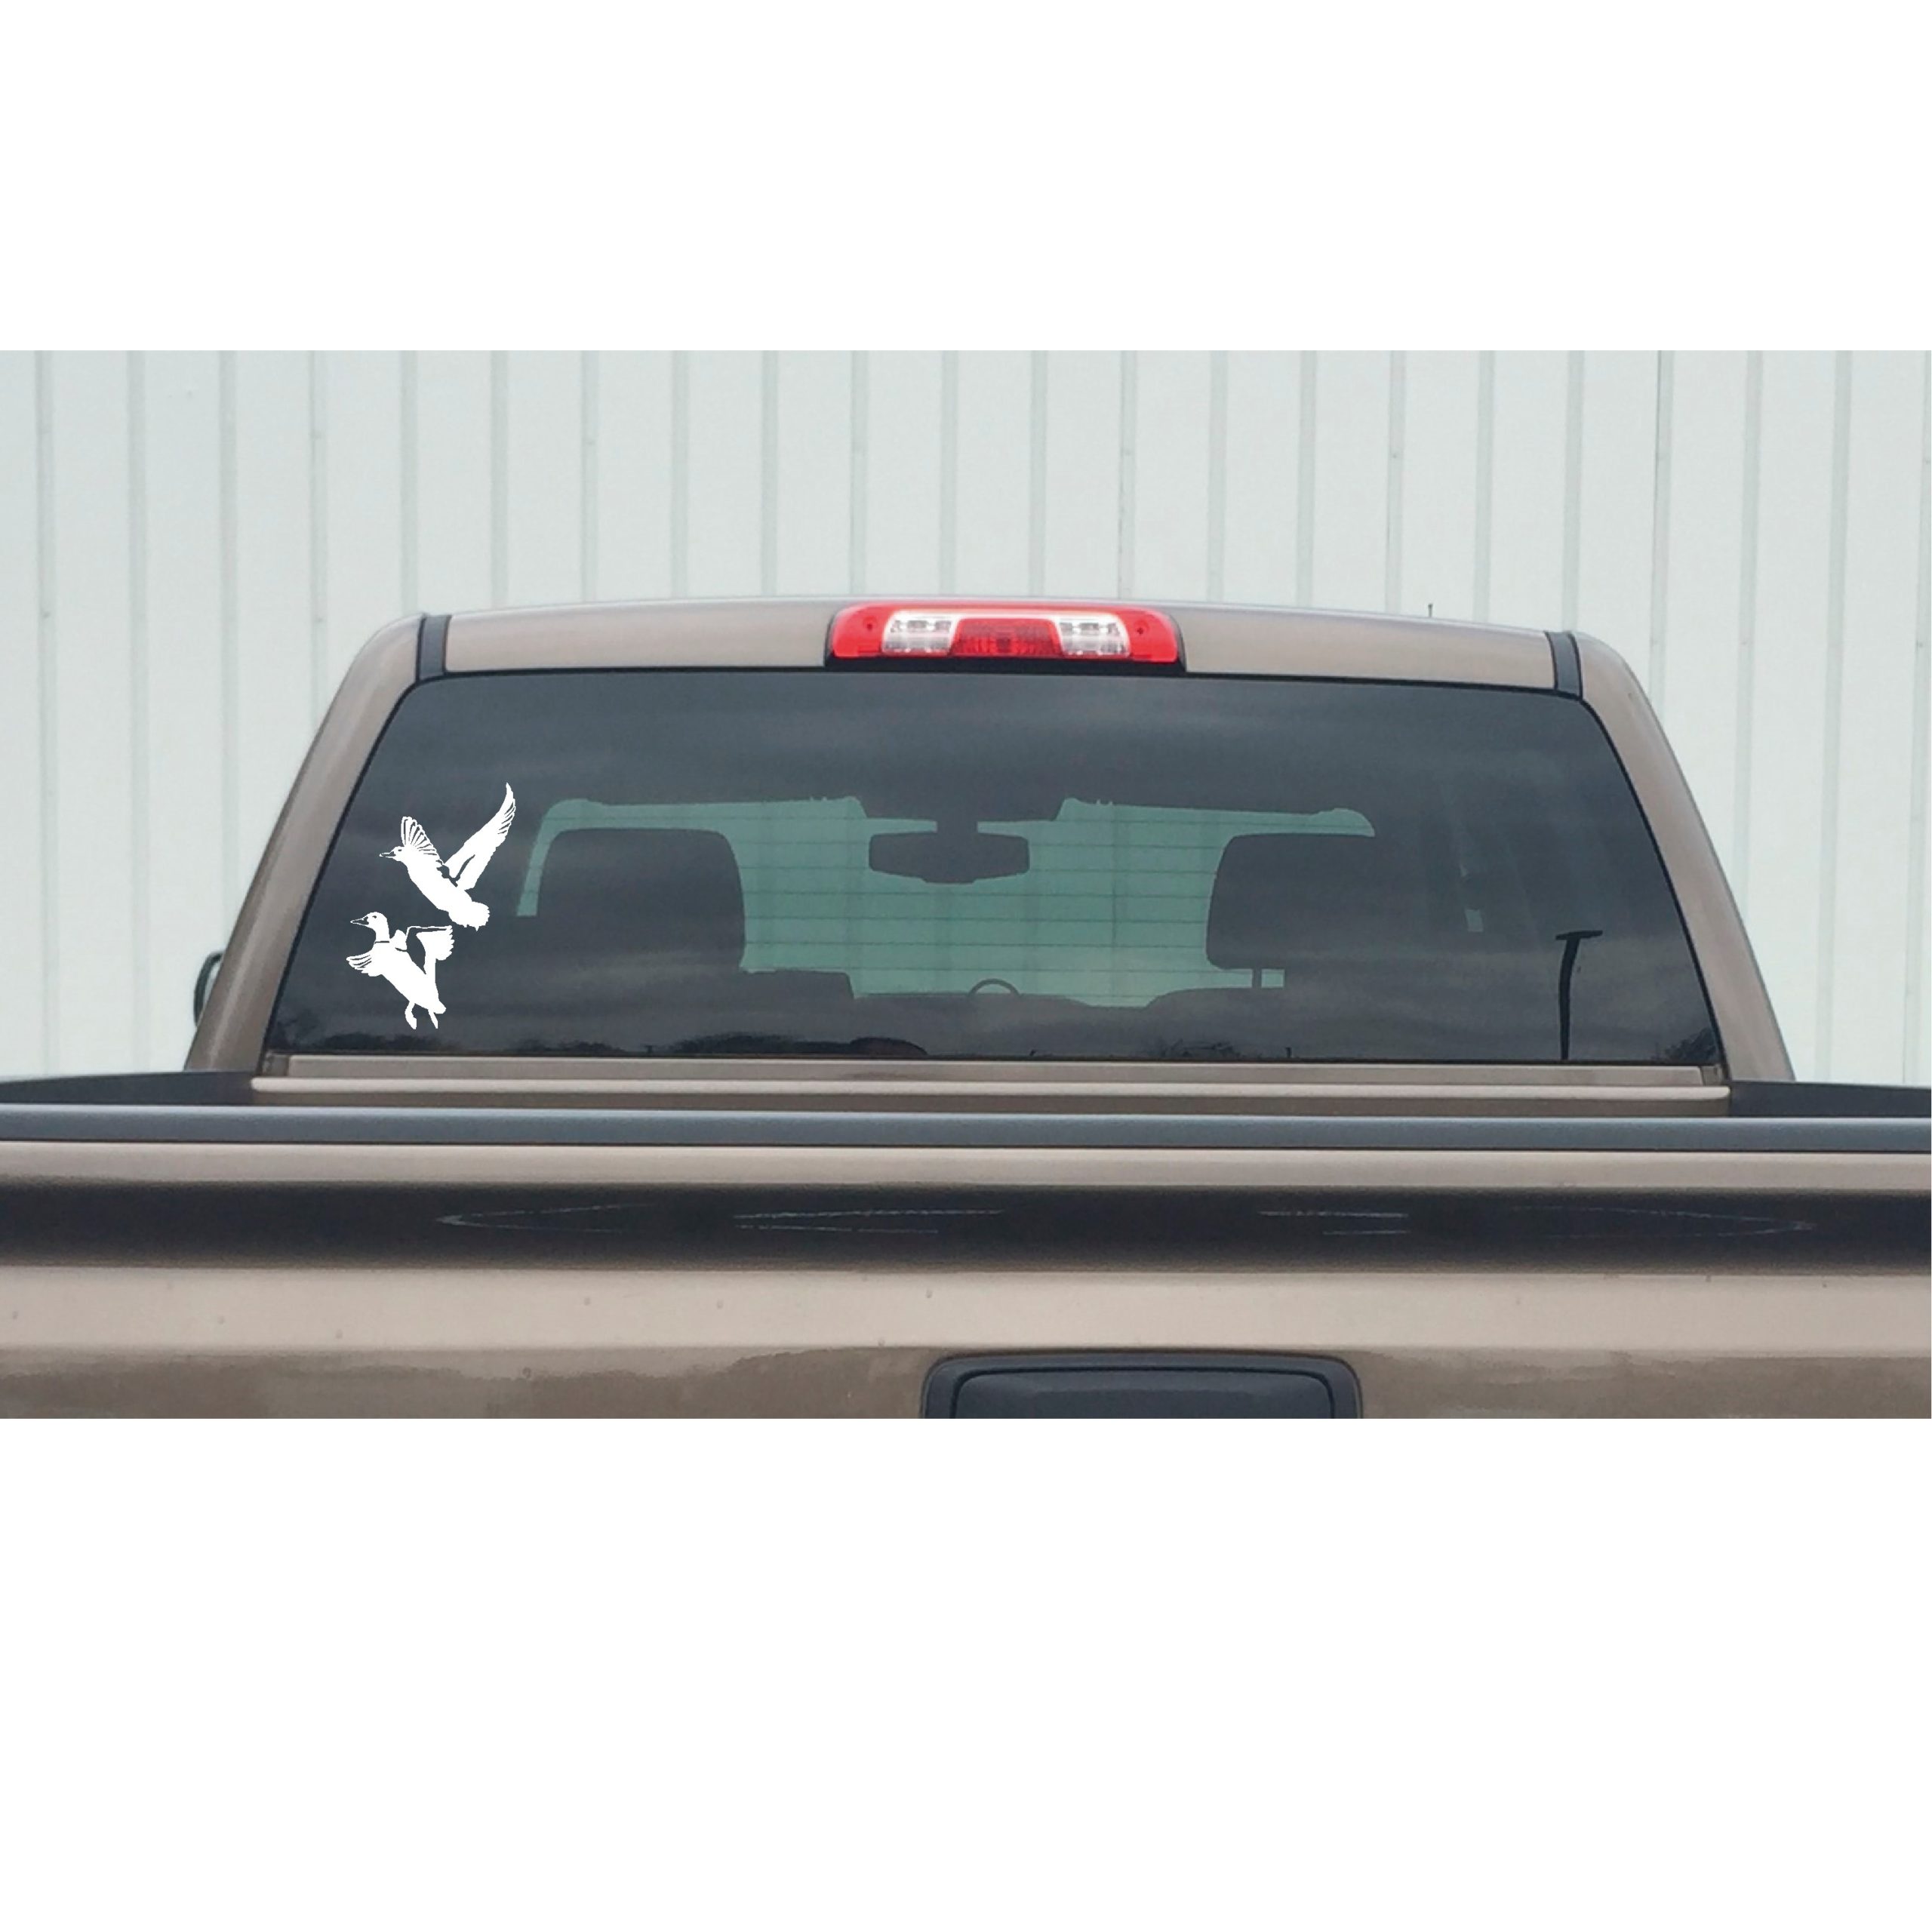 Set of 2 Fishing Sticker Decals Outdoor Lake Hunting Fishing Truck SUV Boat